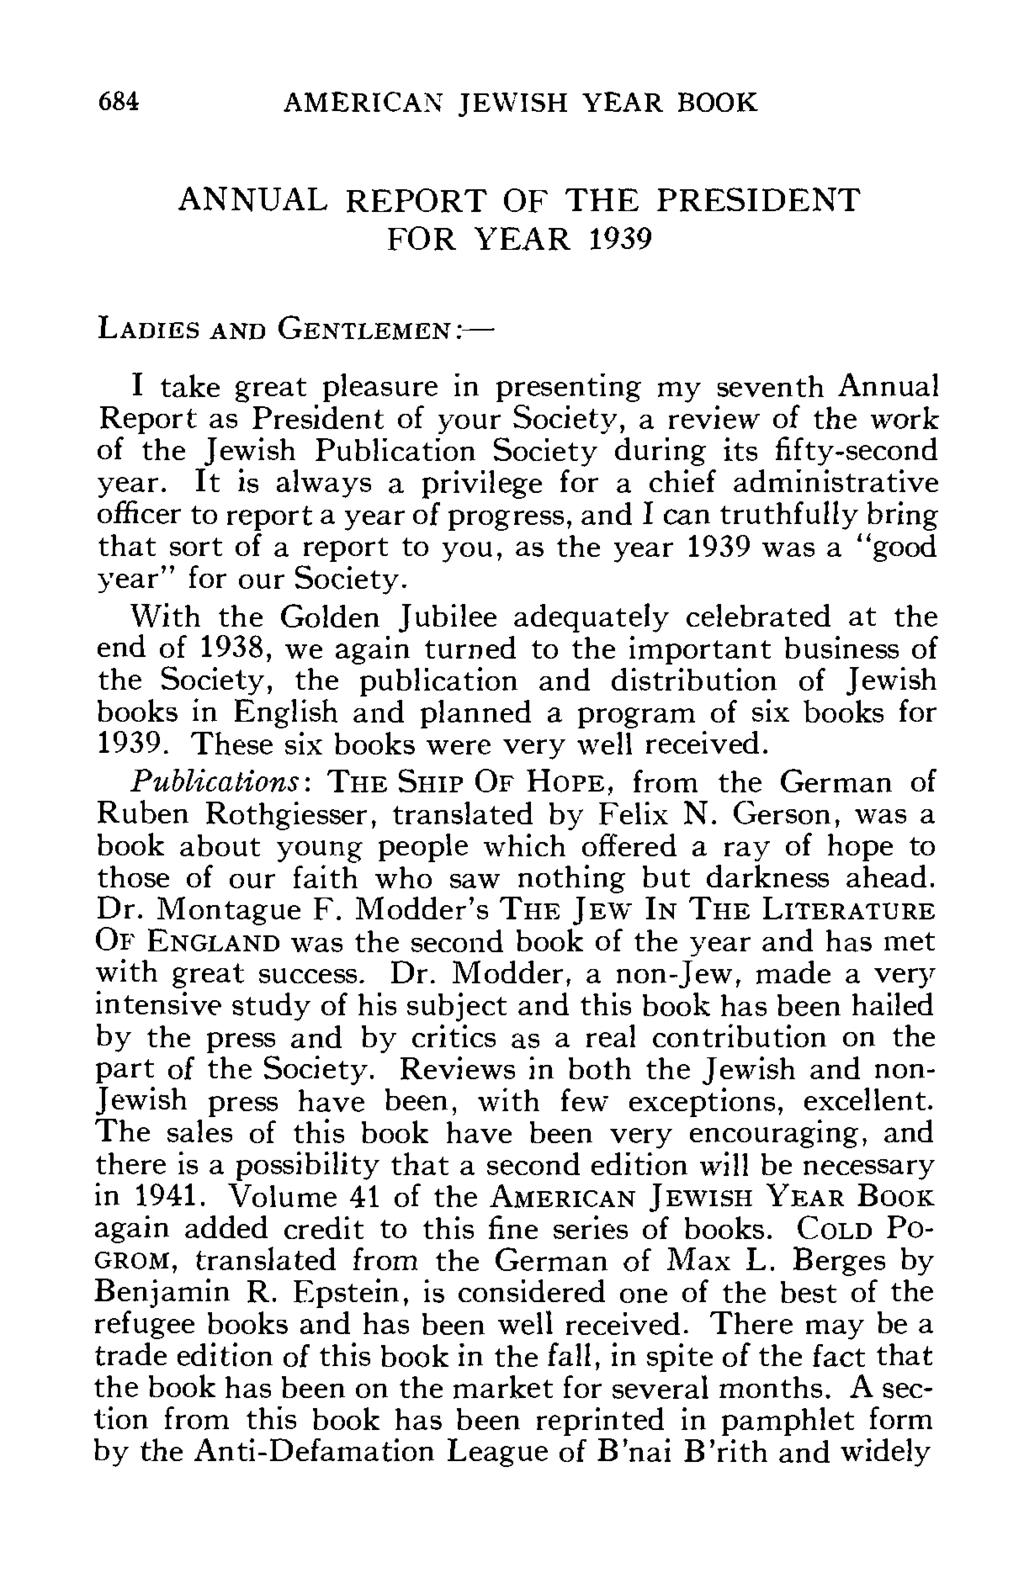 684 AMERICAN JEWISH YEAR BOOK ANNUAL REPORT OF THE PRESIDENT FOR YEAR 1939 LADIES AND GENTLEMEN : I take great pleasure in presenting my seventh Annual Report as President of your Society, a review